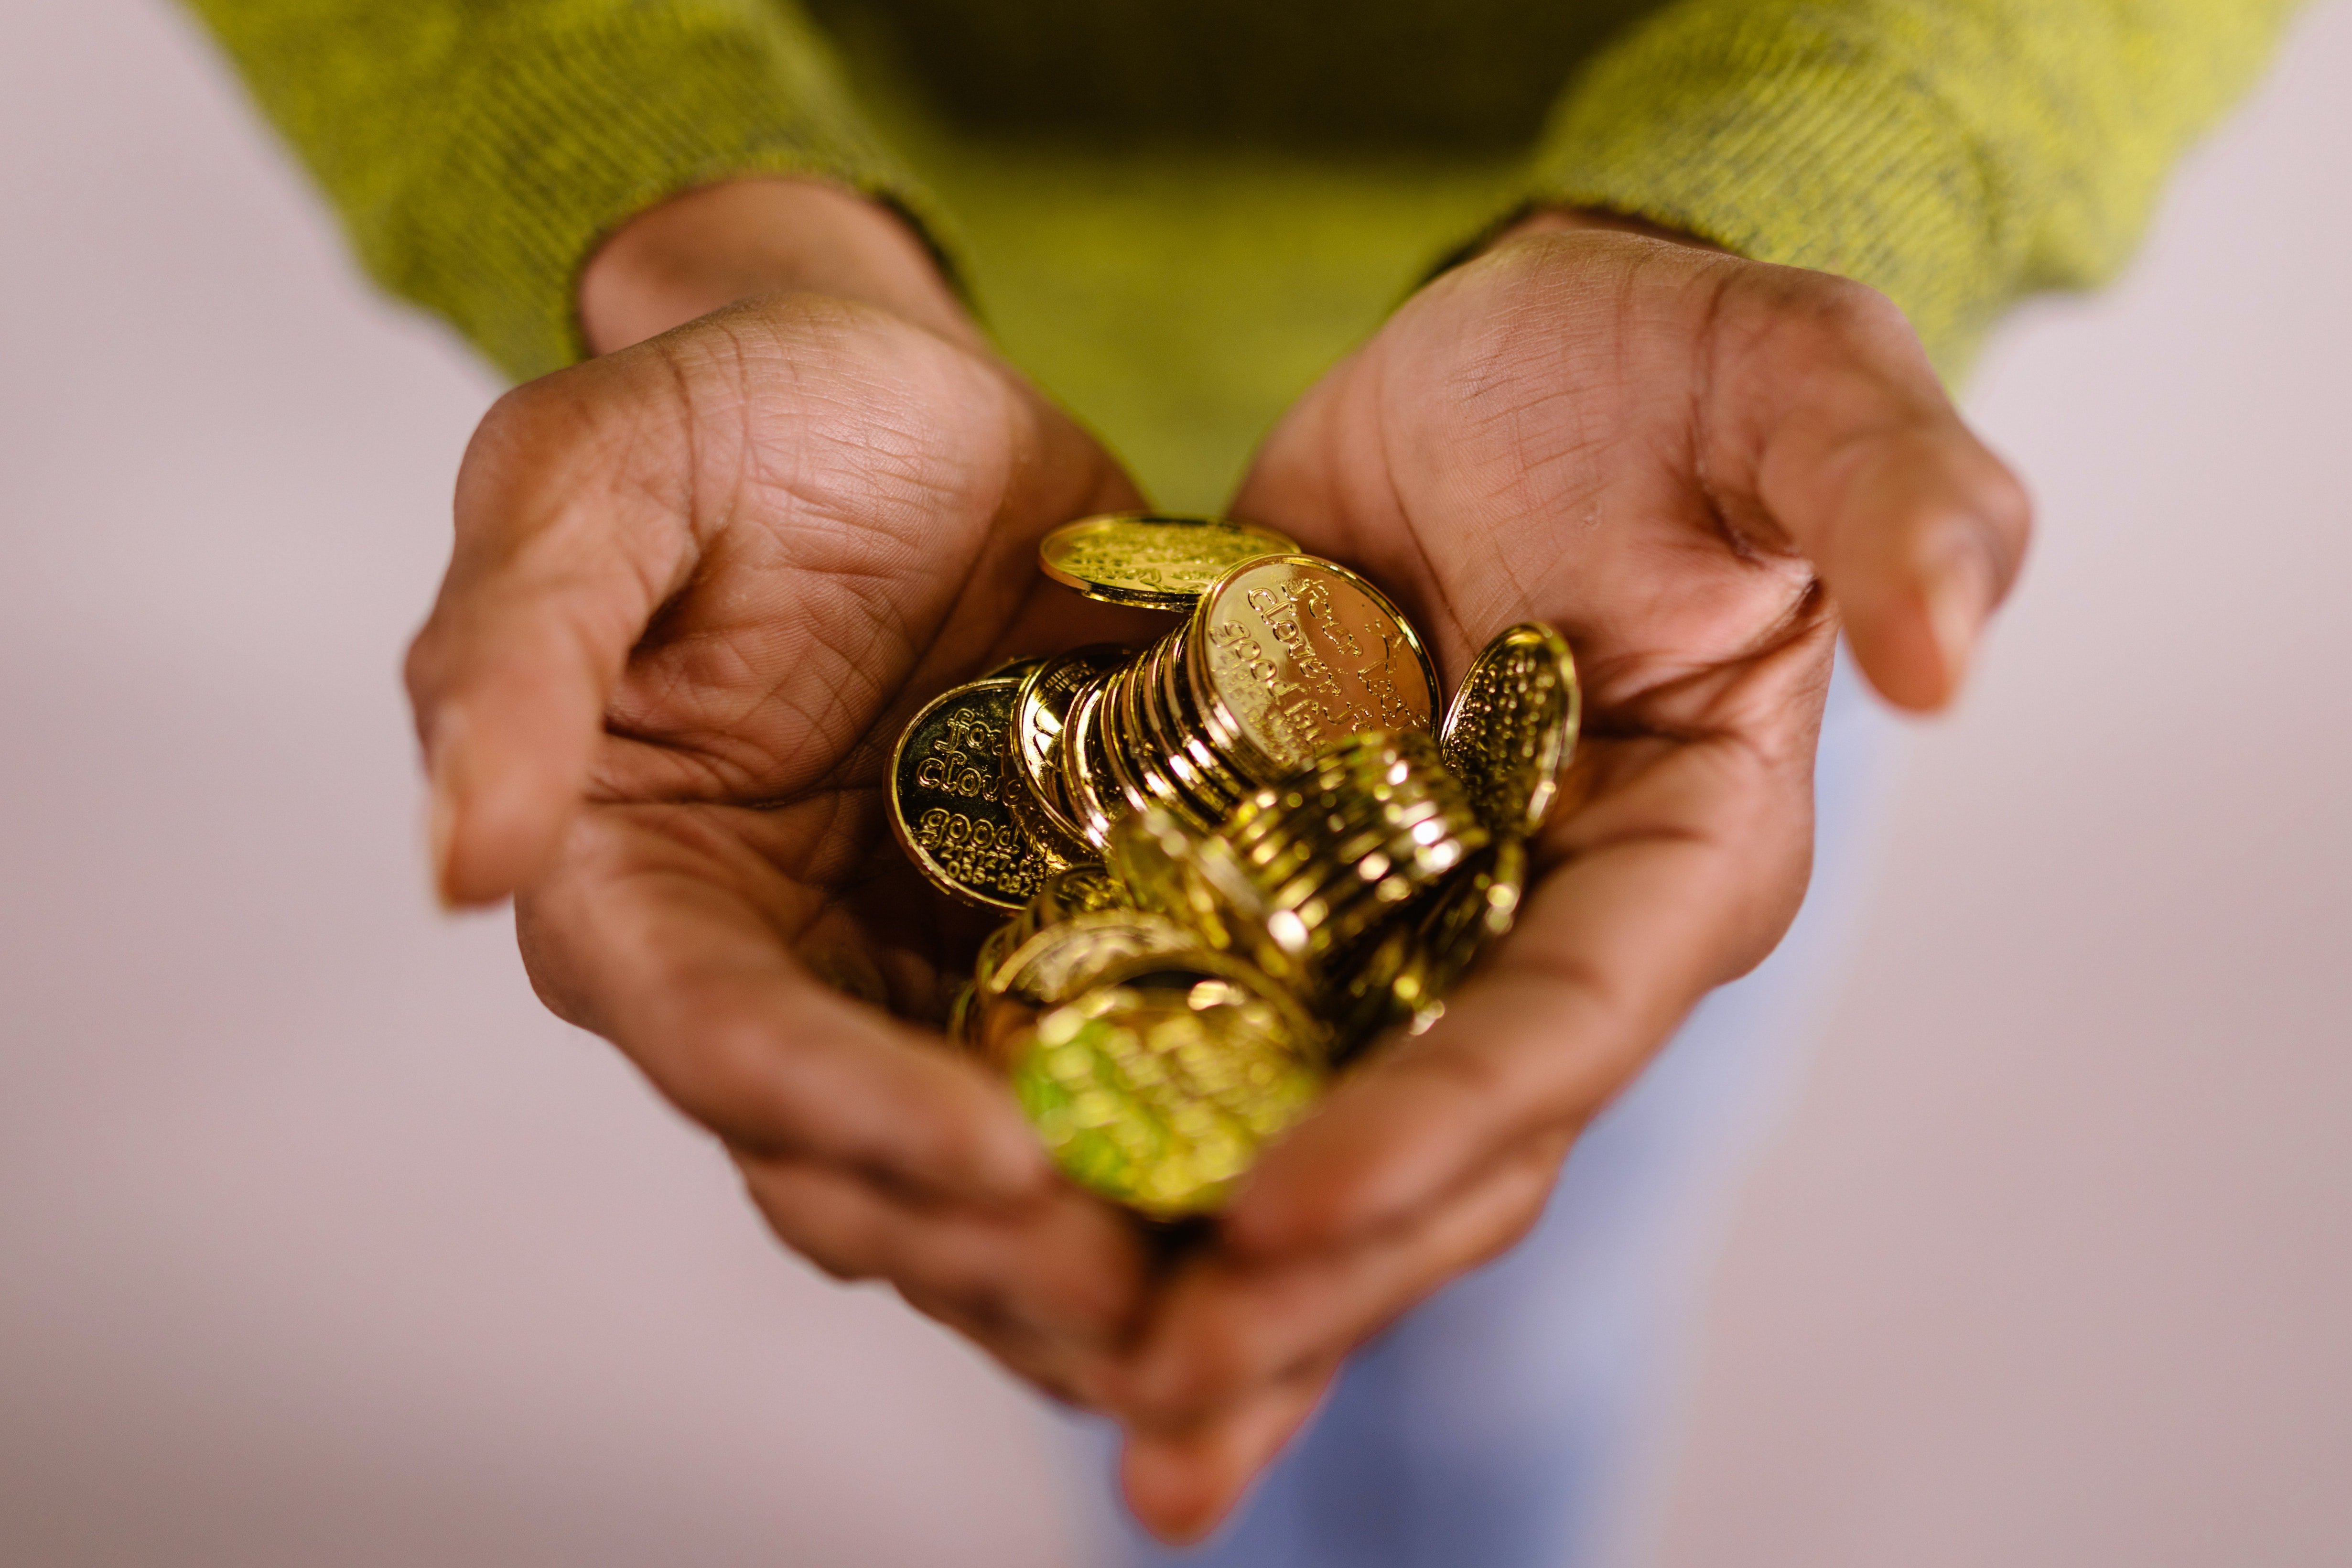 OP's uncle was curious about the gold coins that belonged to the late grandpa | Source: Pexels